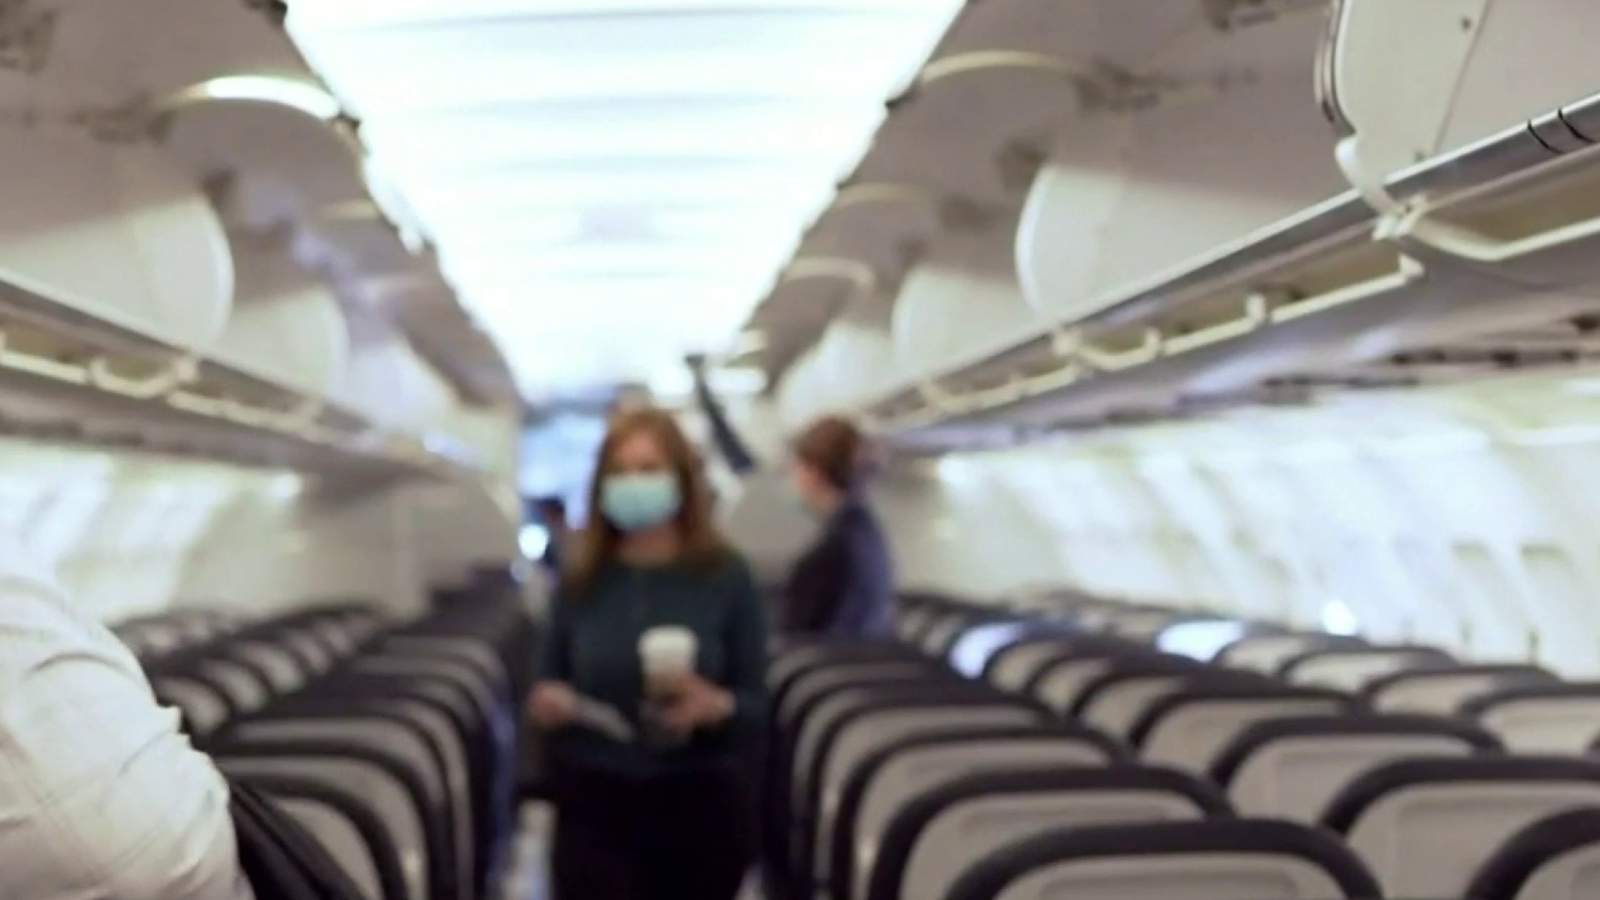 Many Americans flying for holiday despite CDC pleas